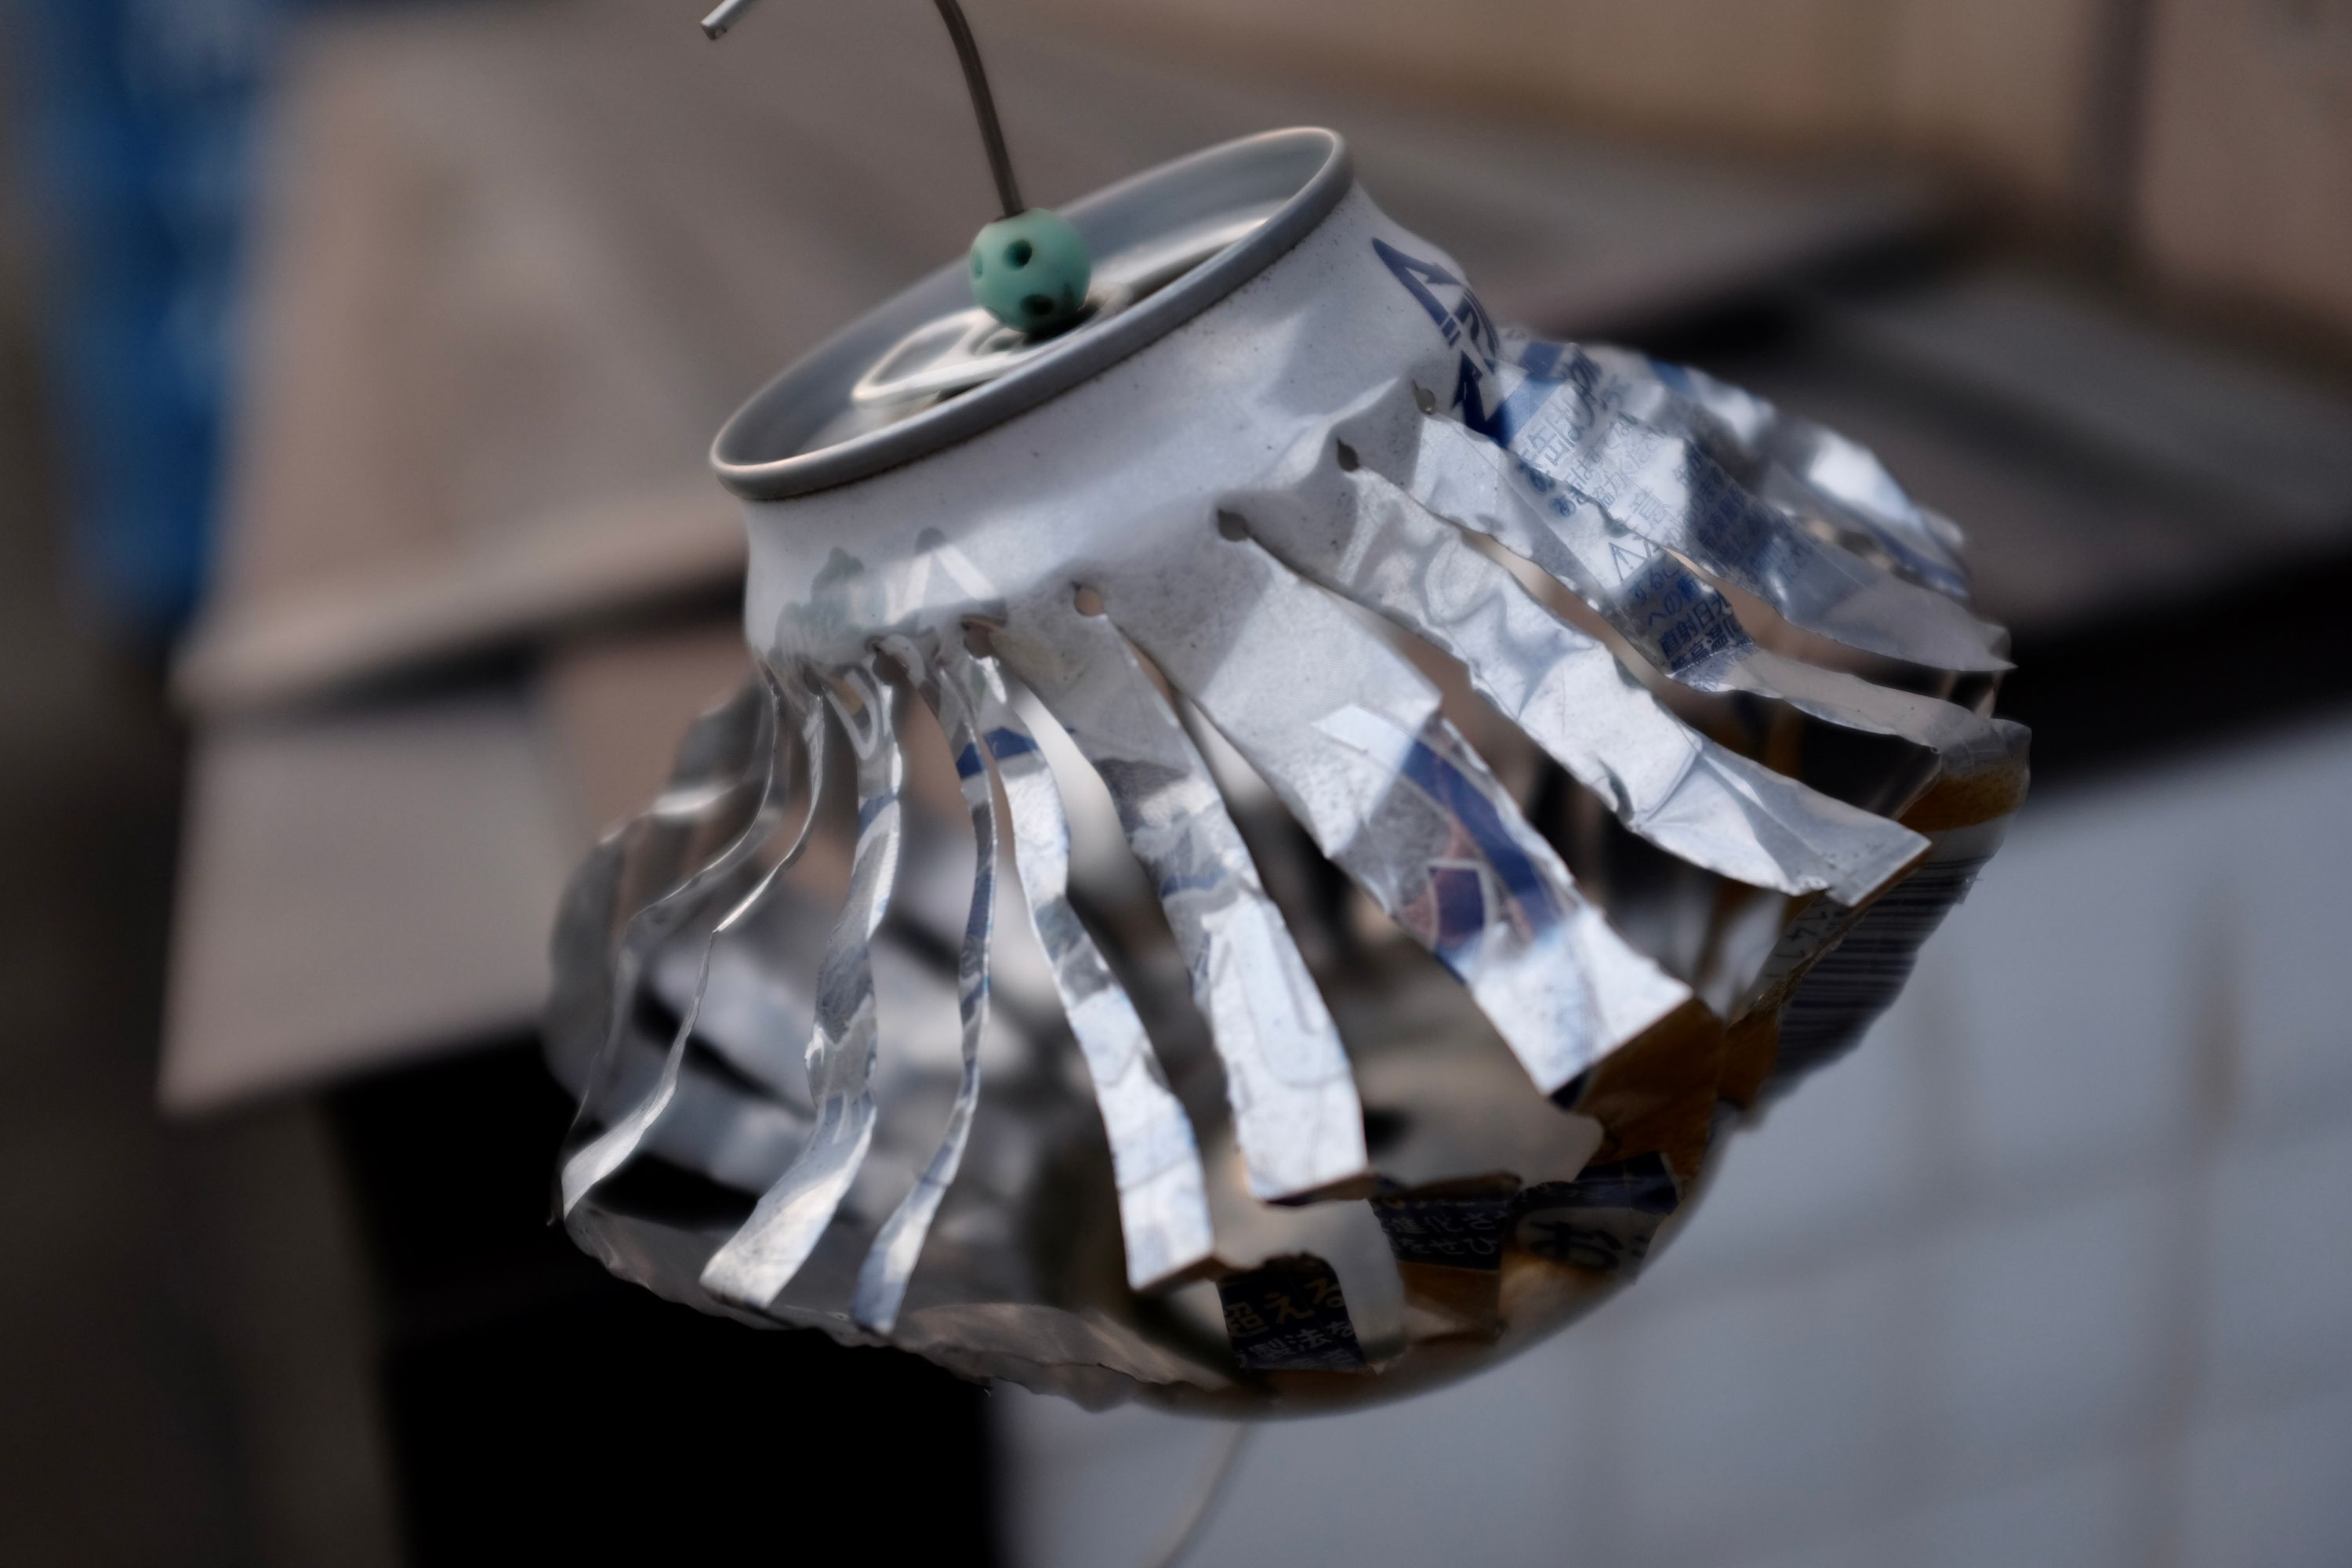 A wind chime made from an aluminium can.